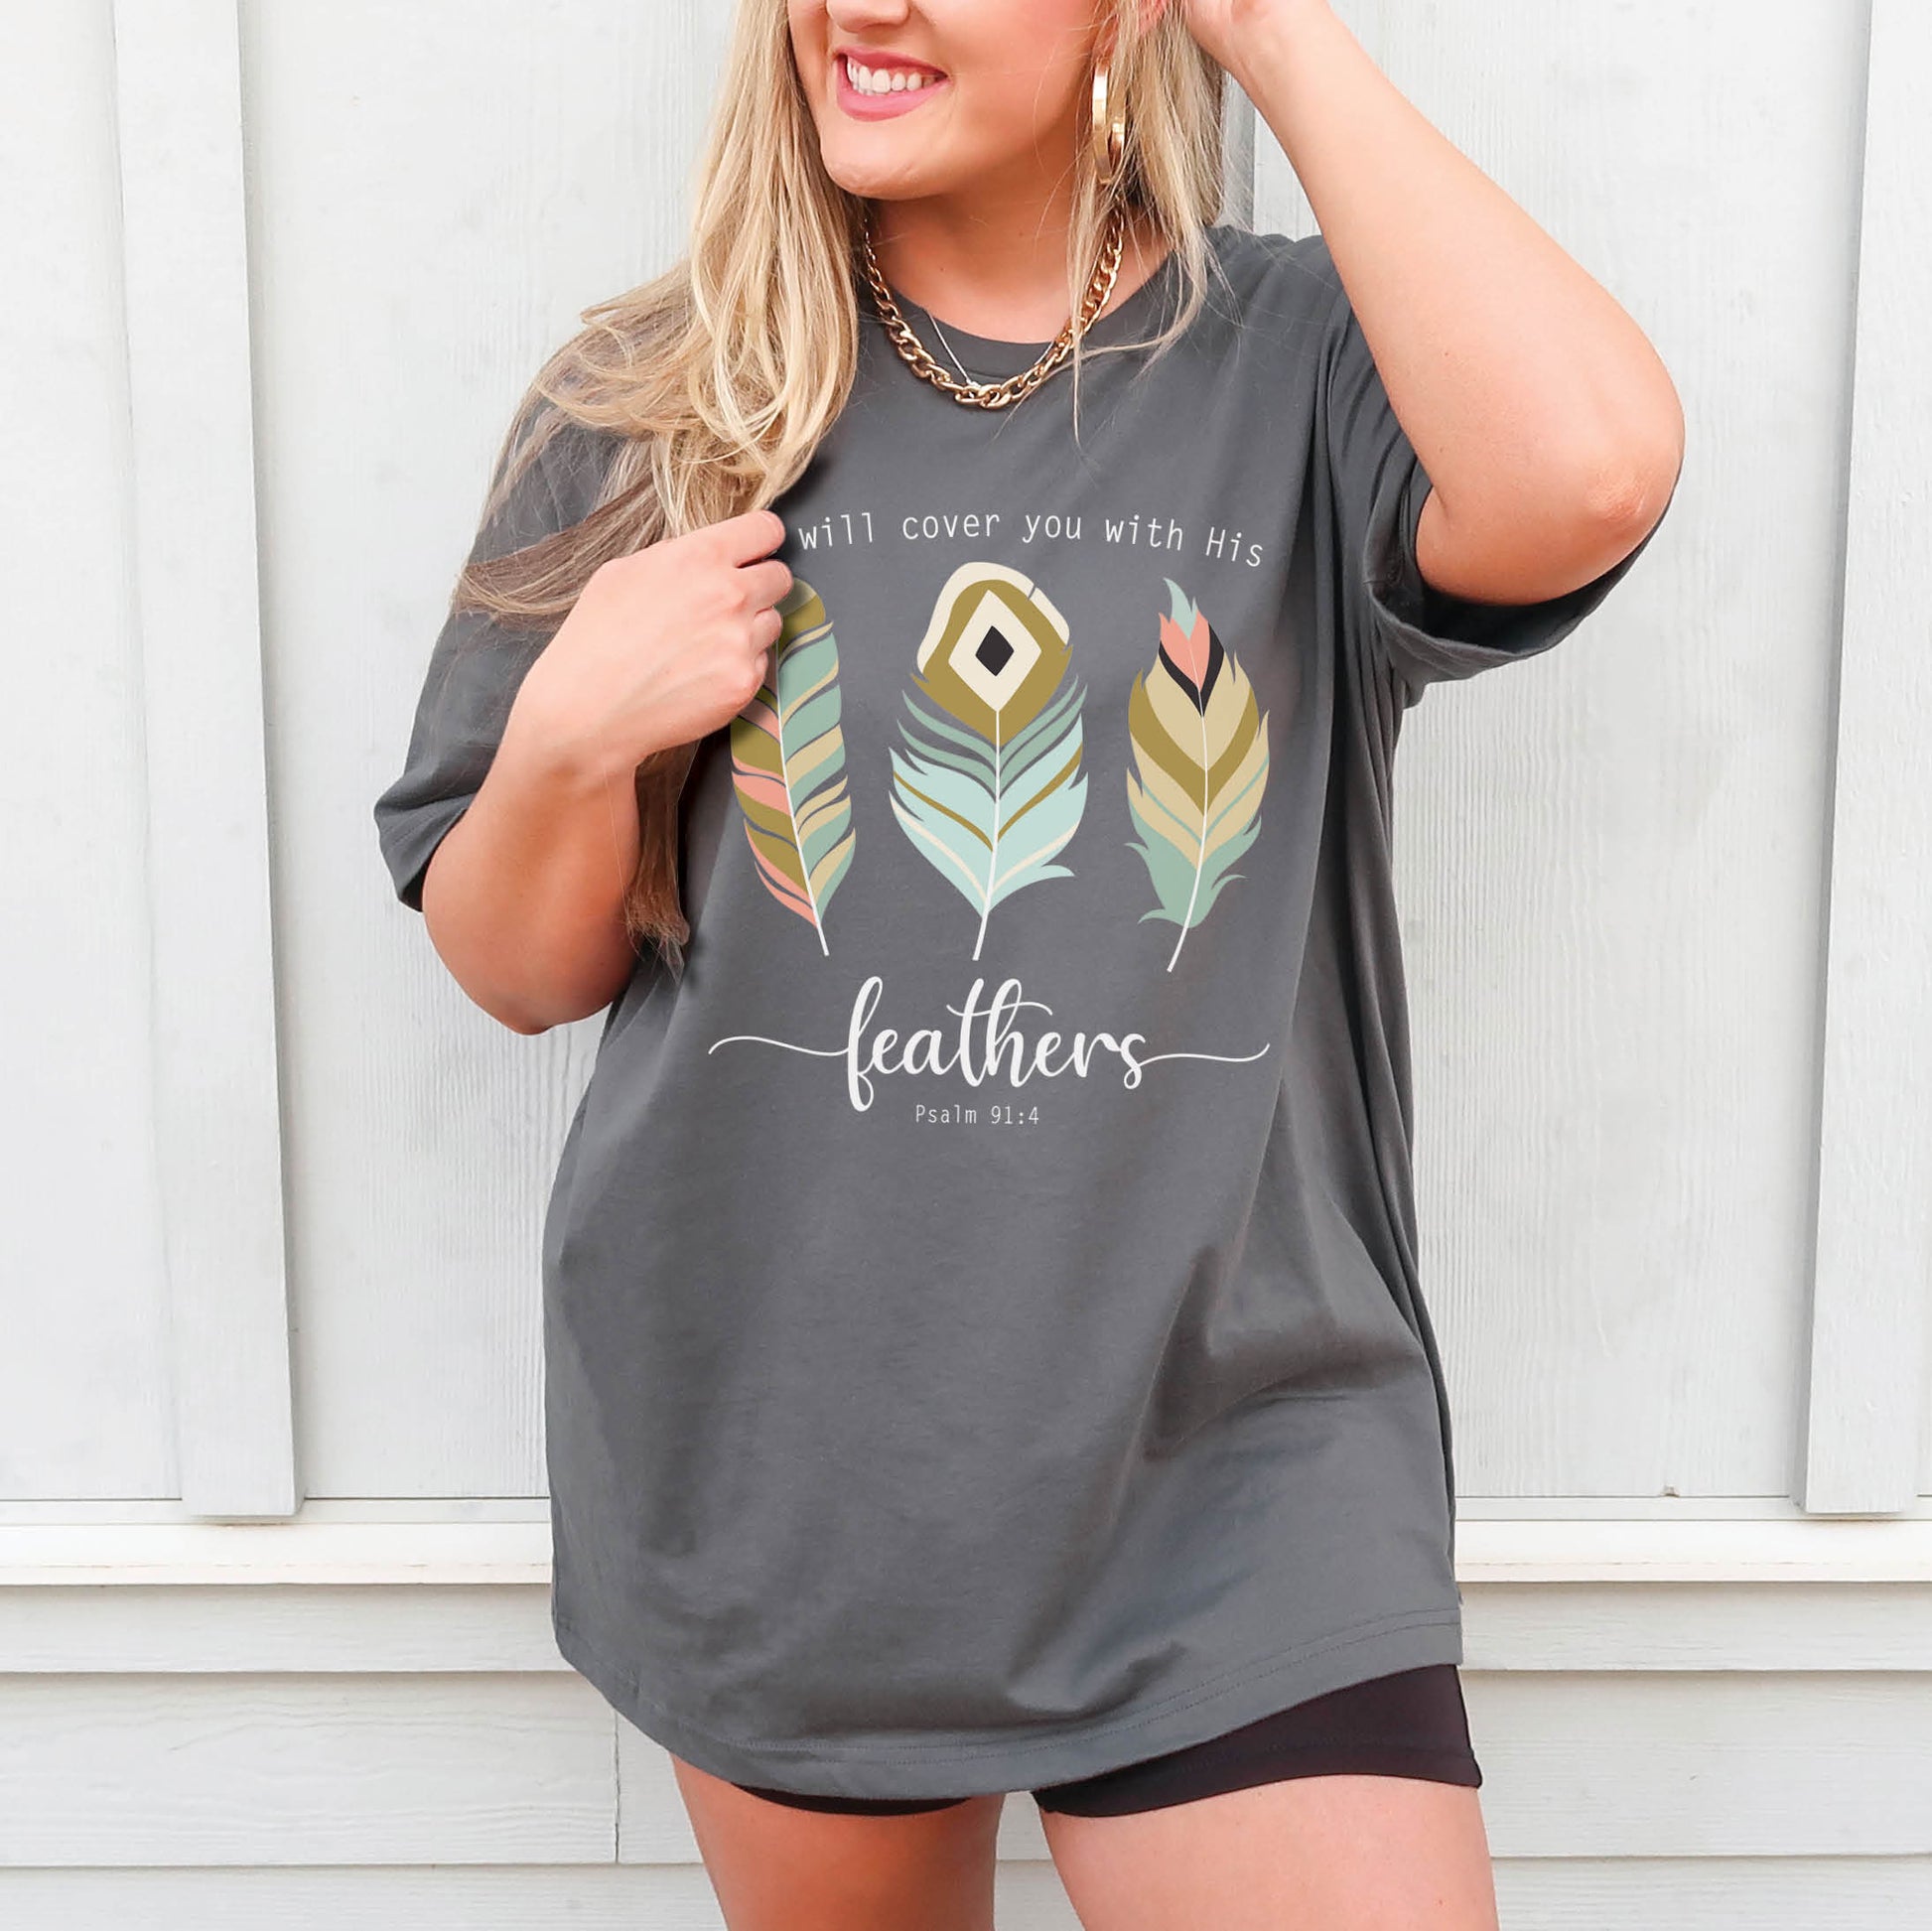 Psalm 91:4 "He Will Cover You With His Feathers" boho bible verse Christian woman aesthetic with teal peach and gold feathers printed on soft asphalt gray unisex t-shirt for women